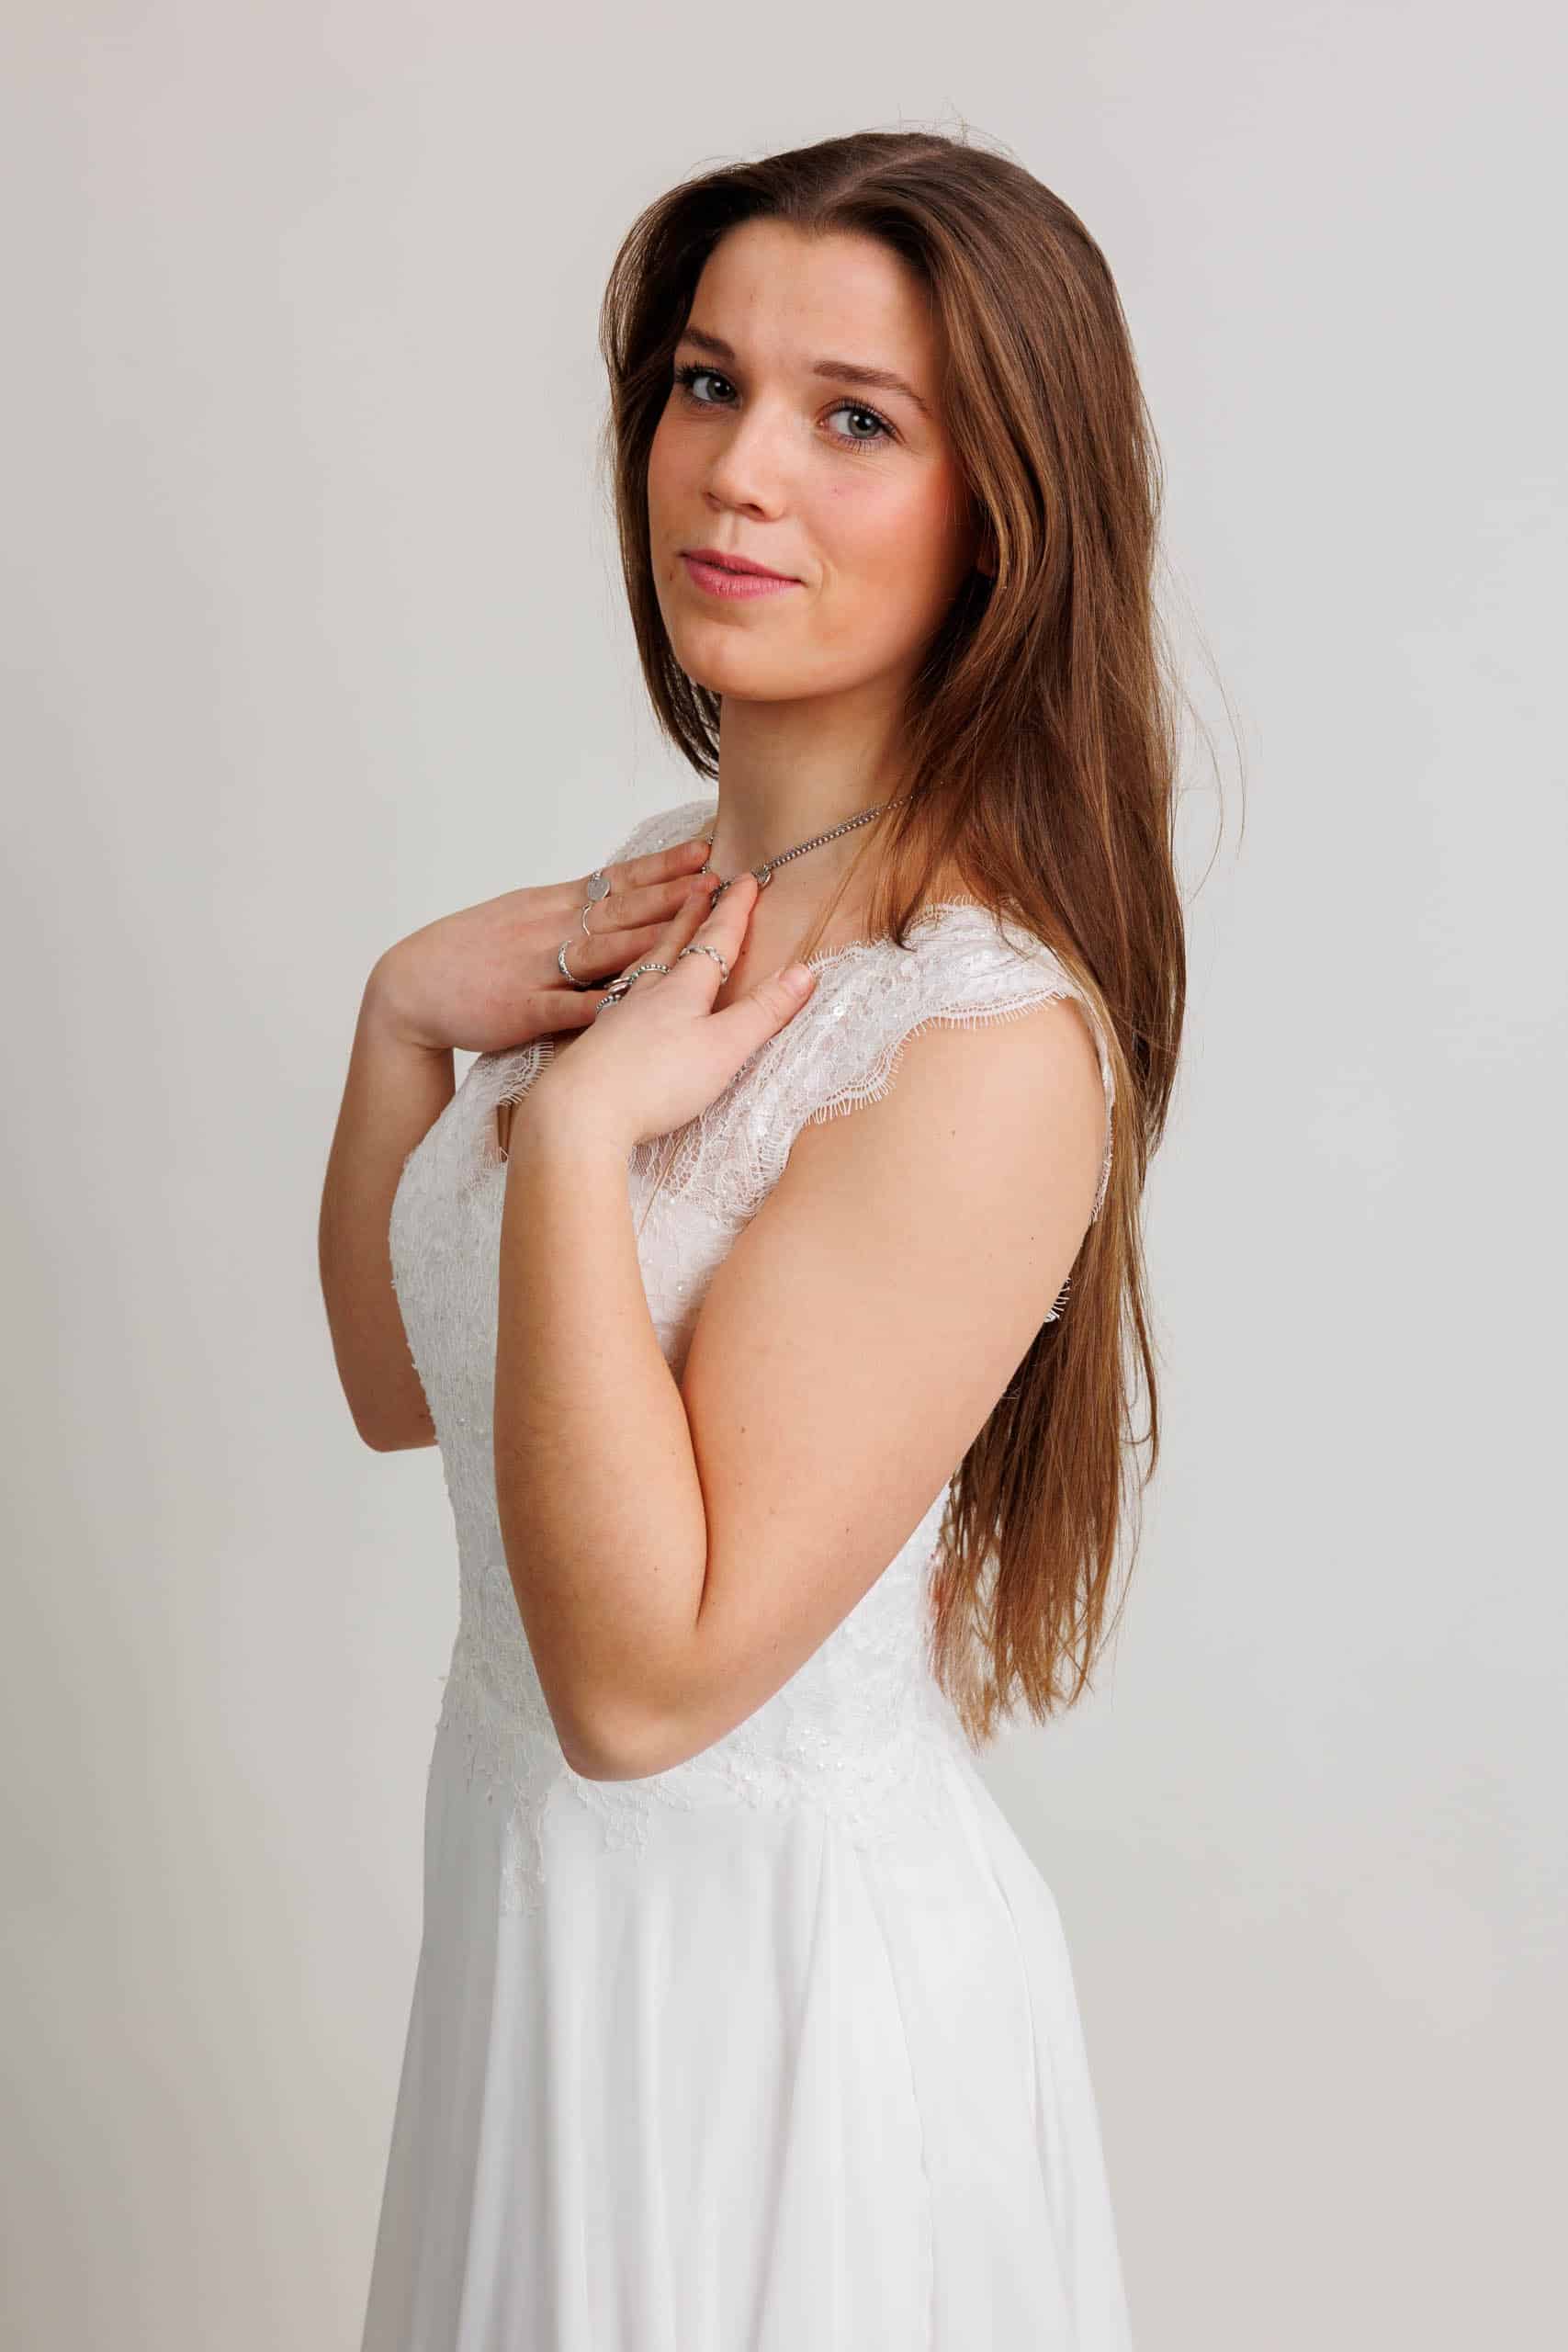 A young woman in a white dress poses for a photo while trying on wedding dresses for fun.